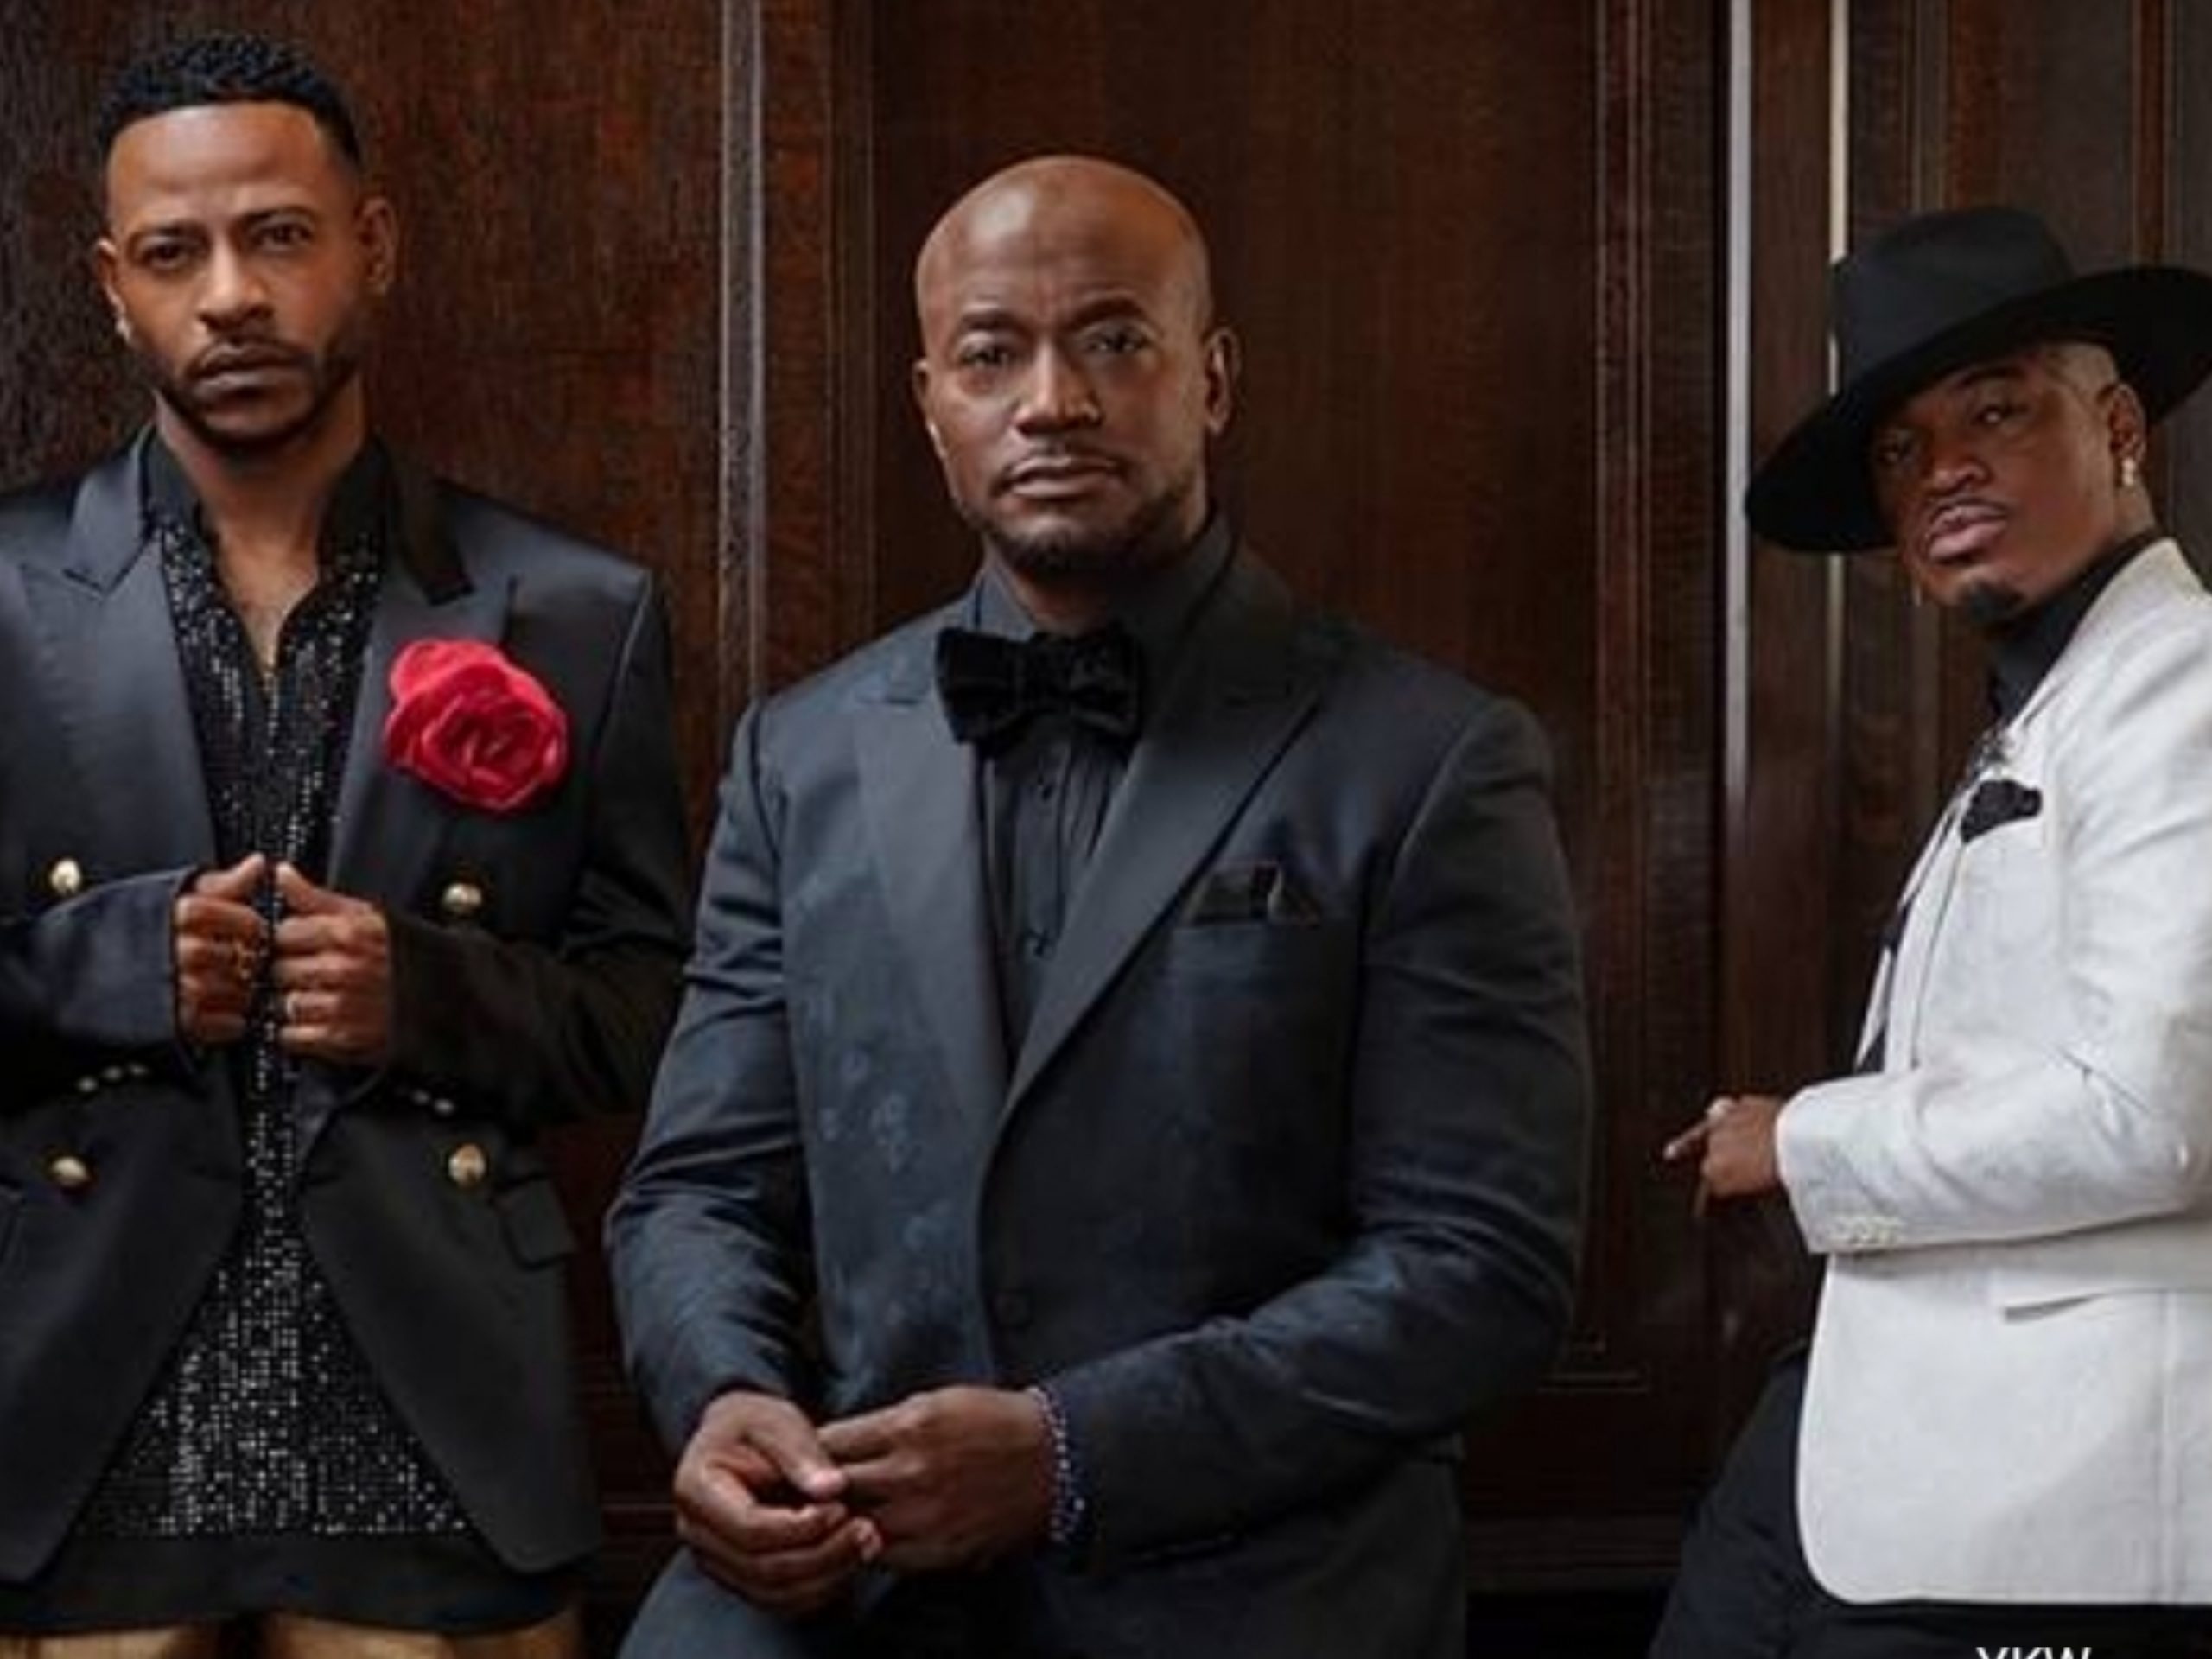 ‘The Black Pack’: Taye Diggs, Ne-Yo, And Eric Bellinger Star In Two CW Specials